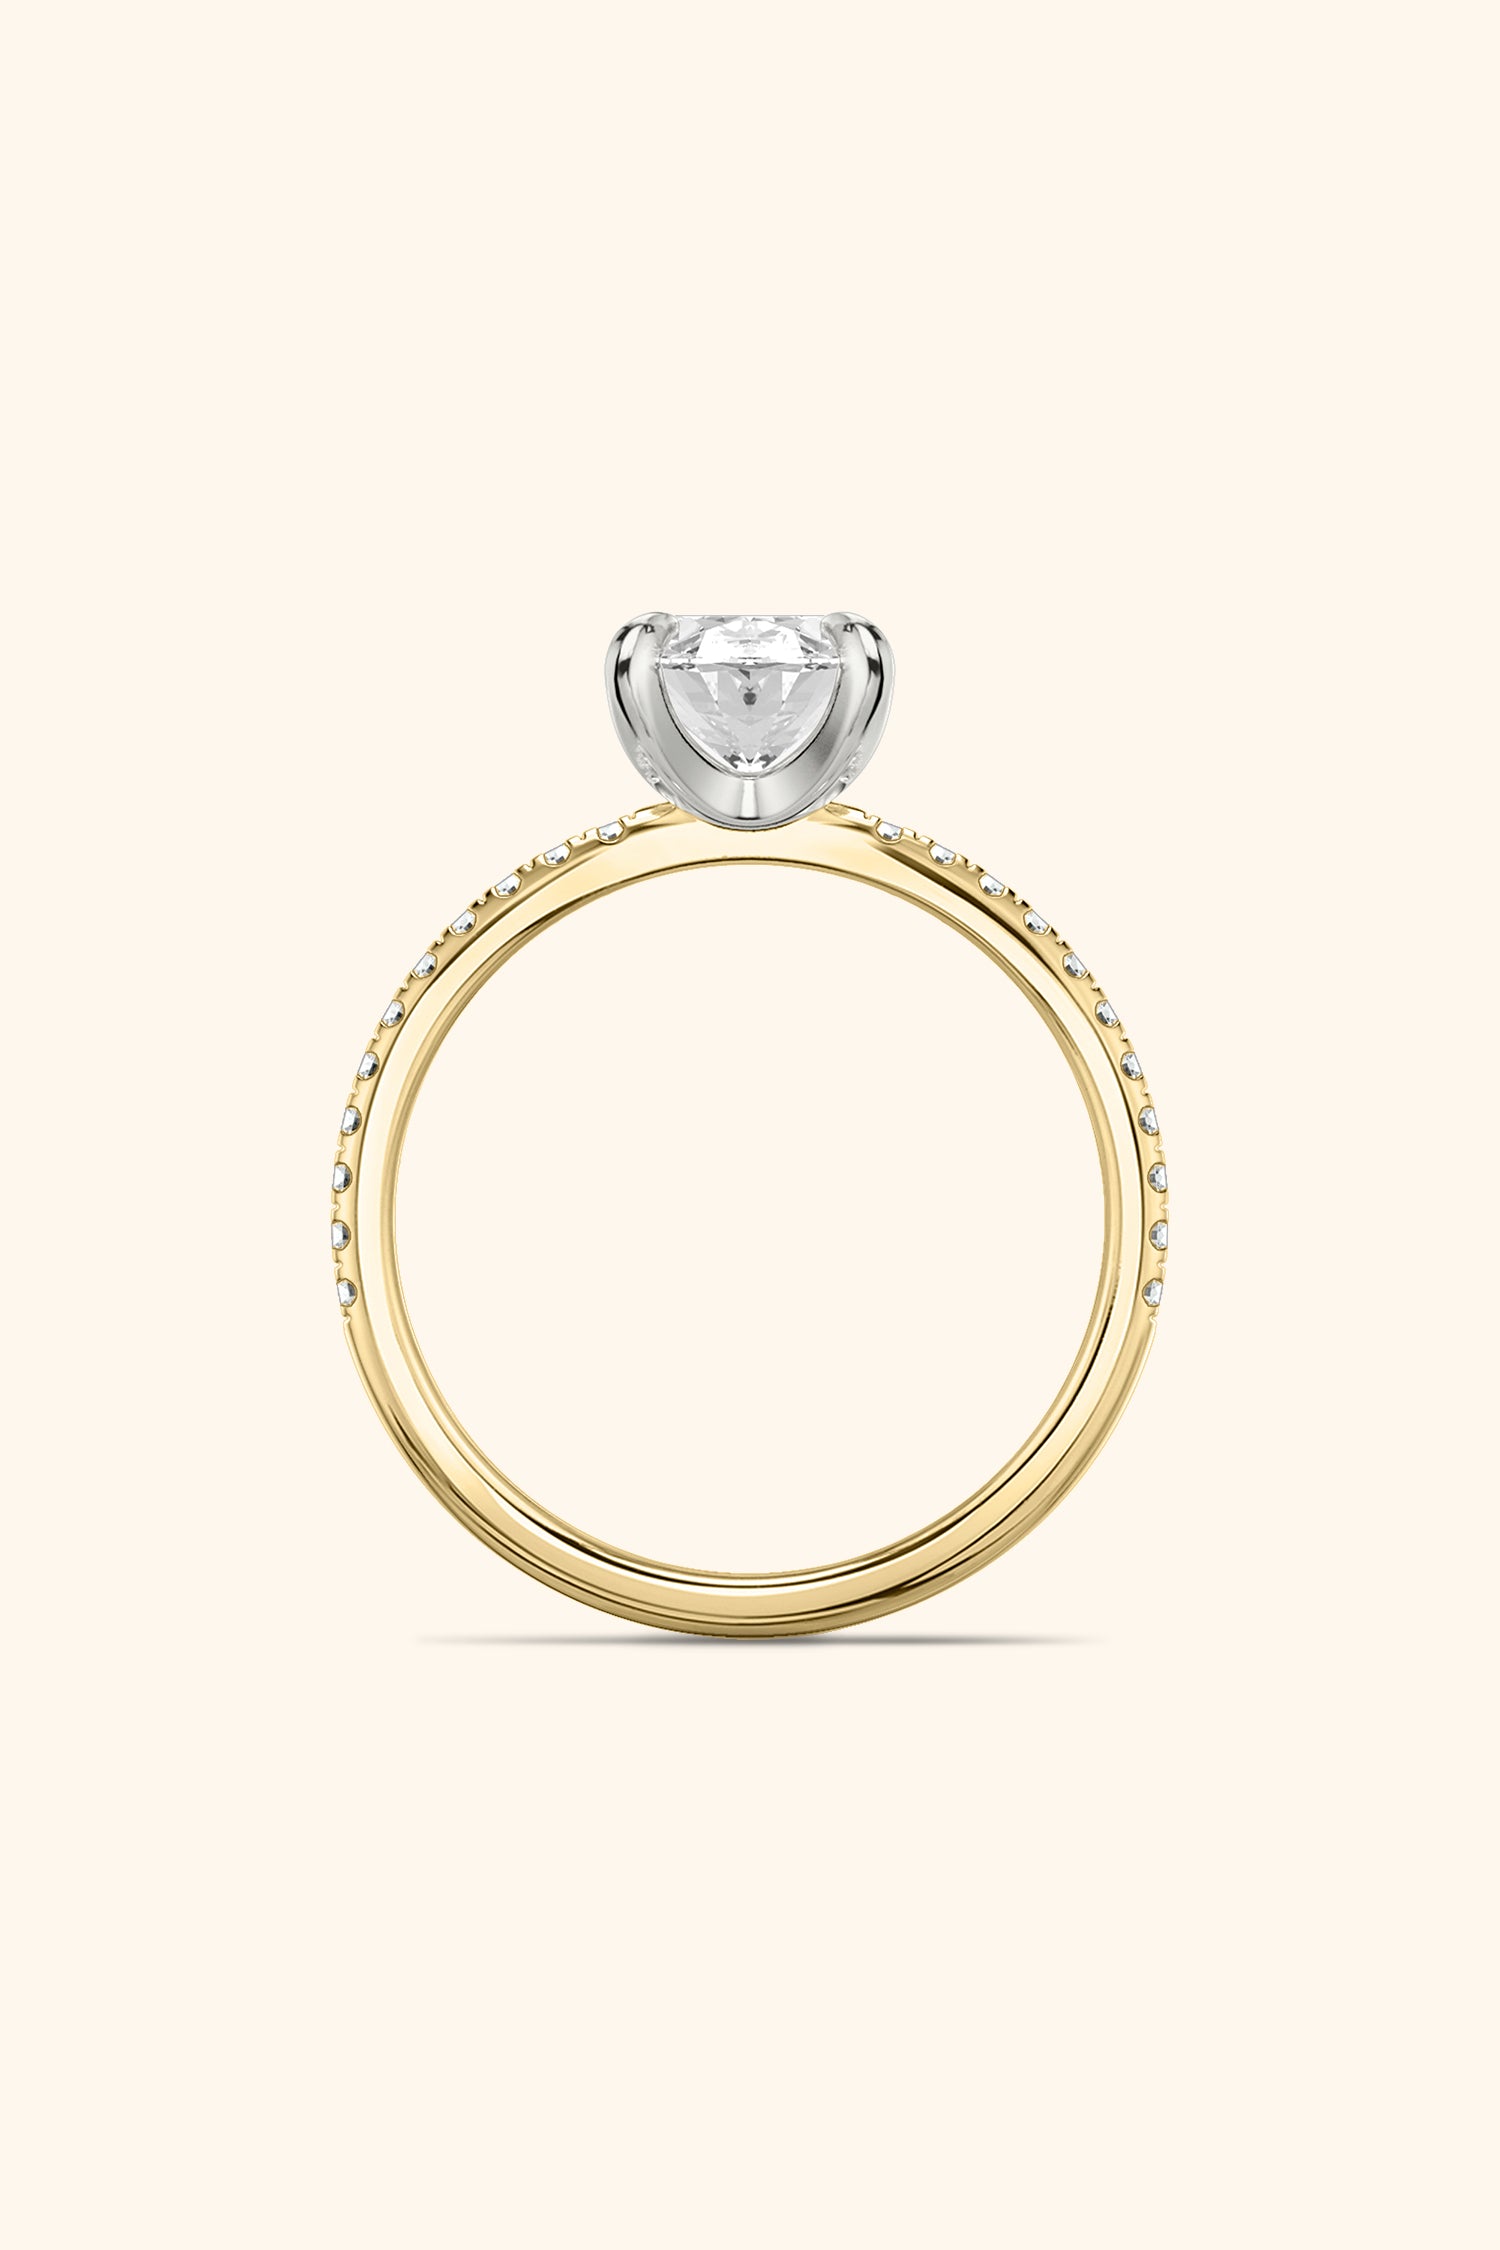 Dual Tone Glance Pavé Ring with 3 Carat Oval Solitaire